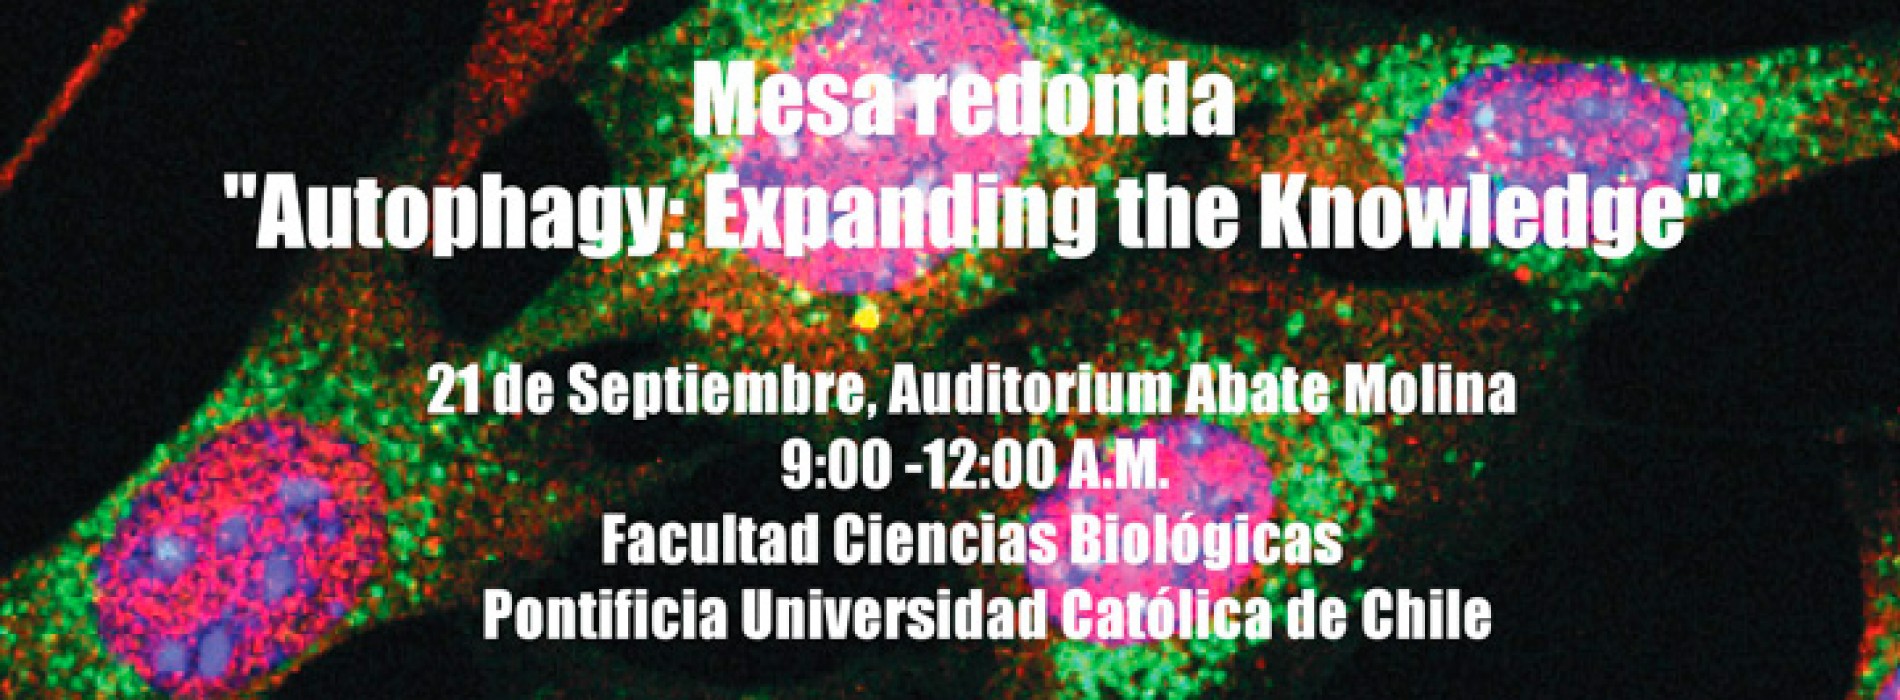 Invitation round table "Autophagy: Expanding the knowledge"